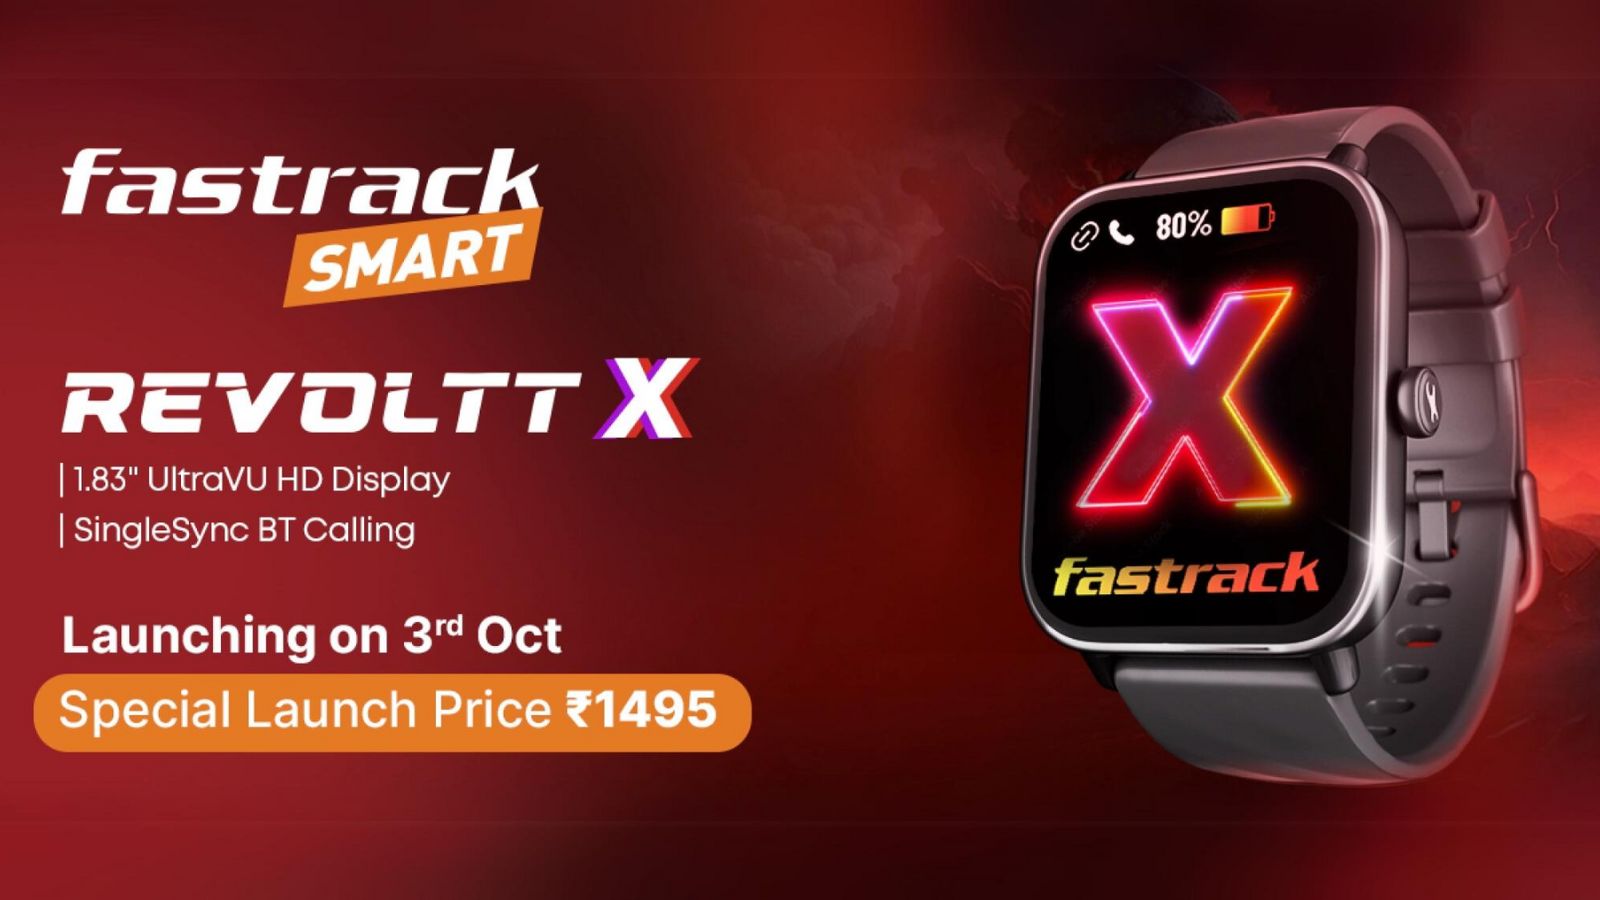 Fastrack Revoltt X Smartwatch with 1.83-inch Display at Rs 1,499 Launches in India